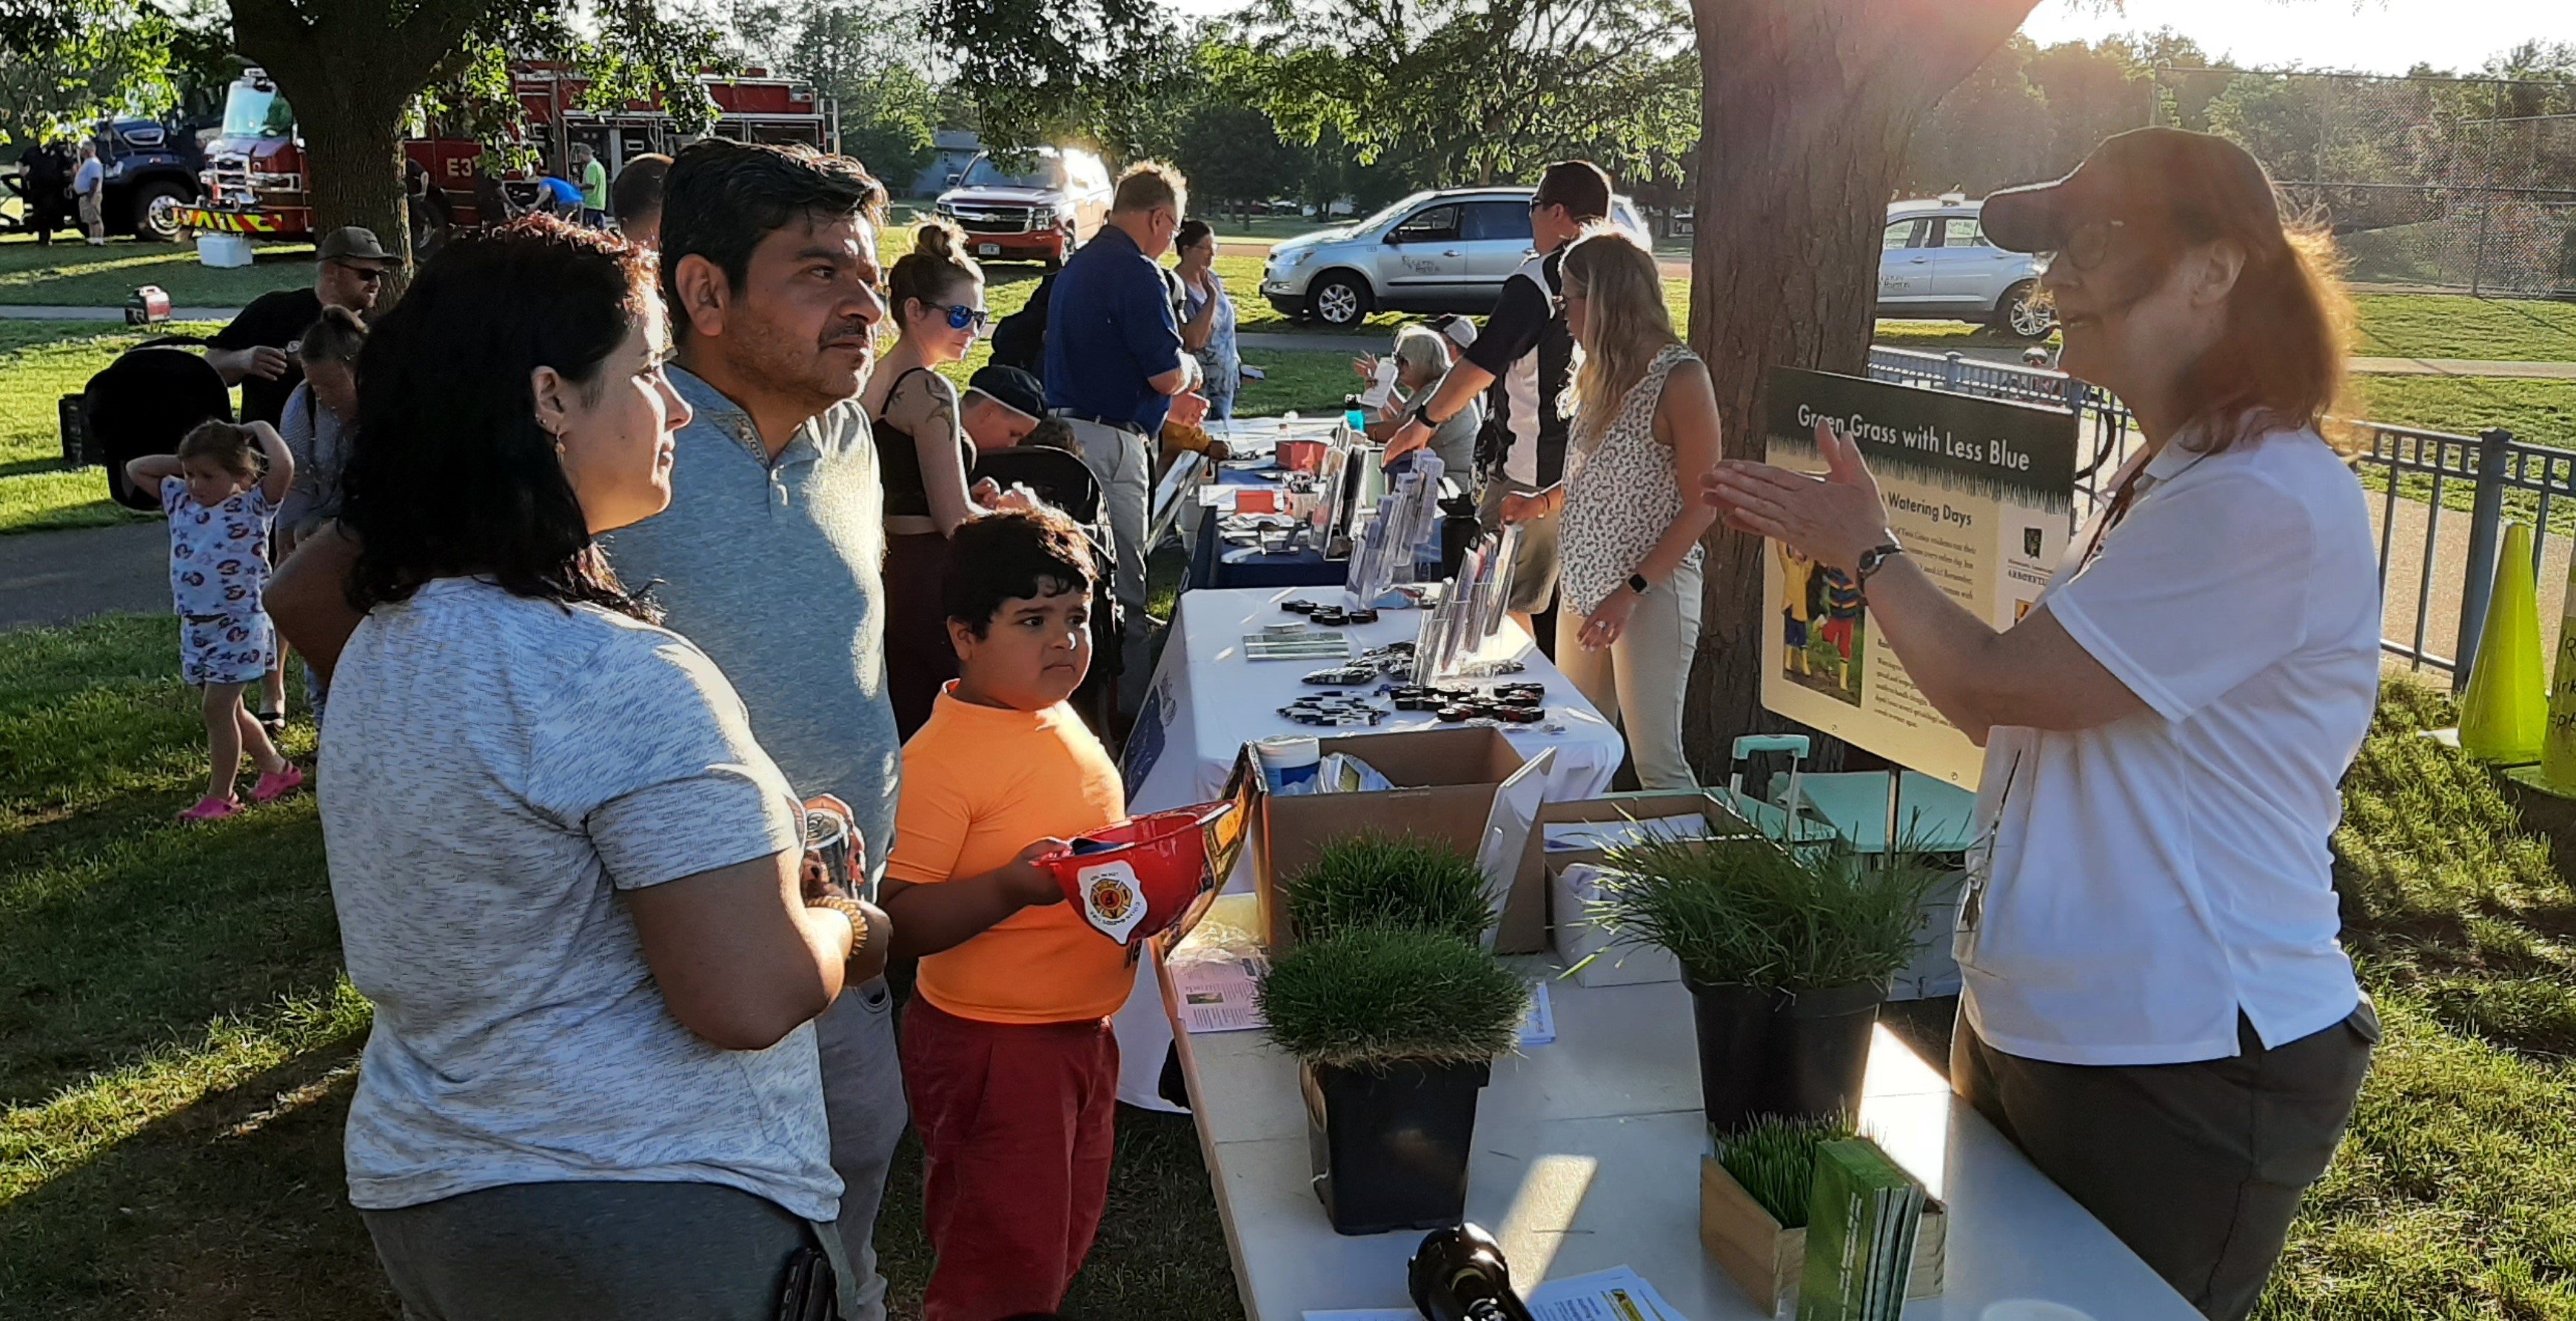 a woman explaining lawn care to a family of three at an outdoor educational event